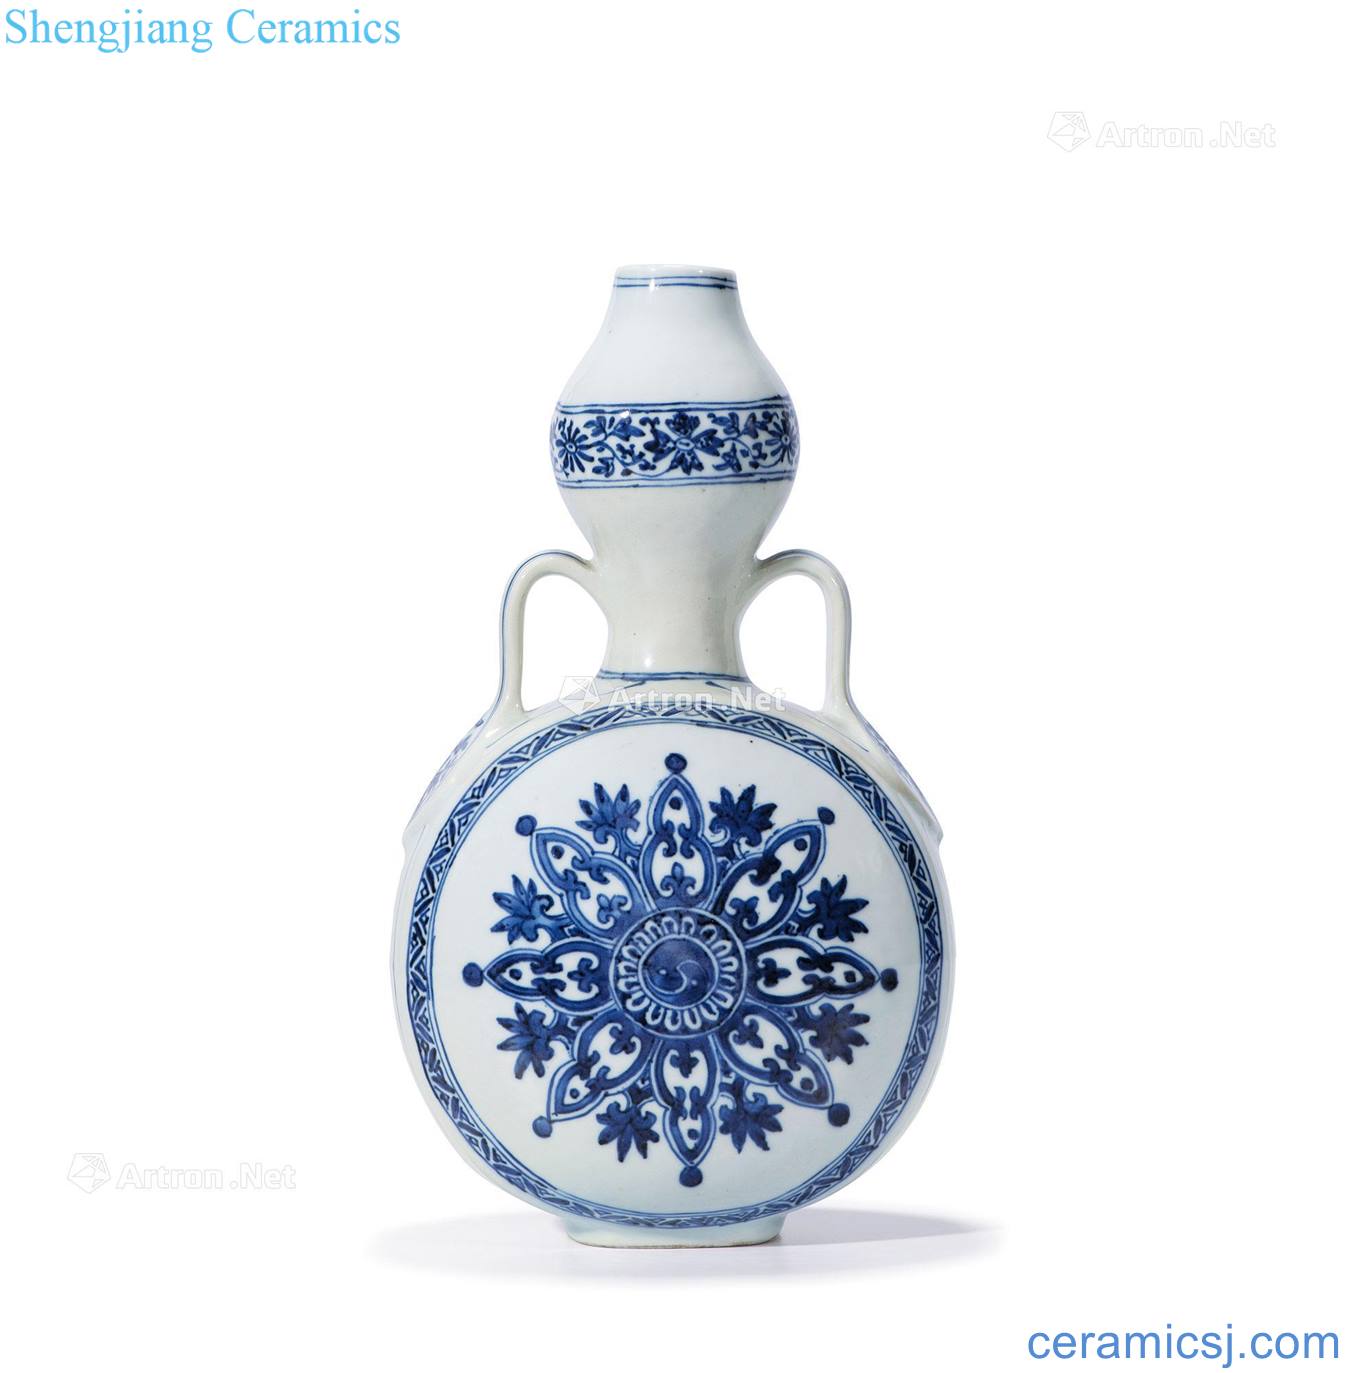 The qing emperor kangxi porcelain round pattern on the bottle